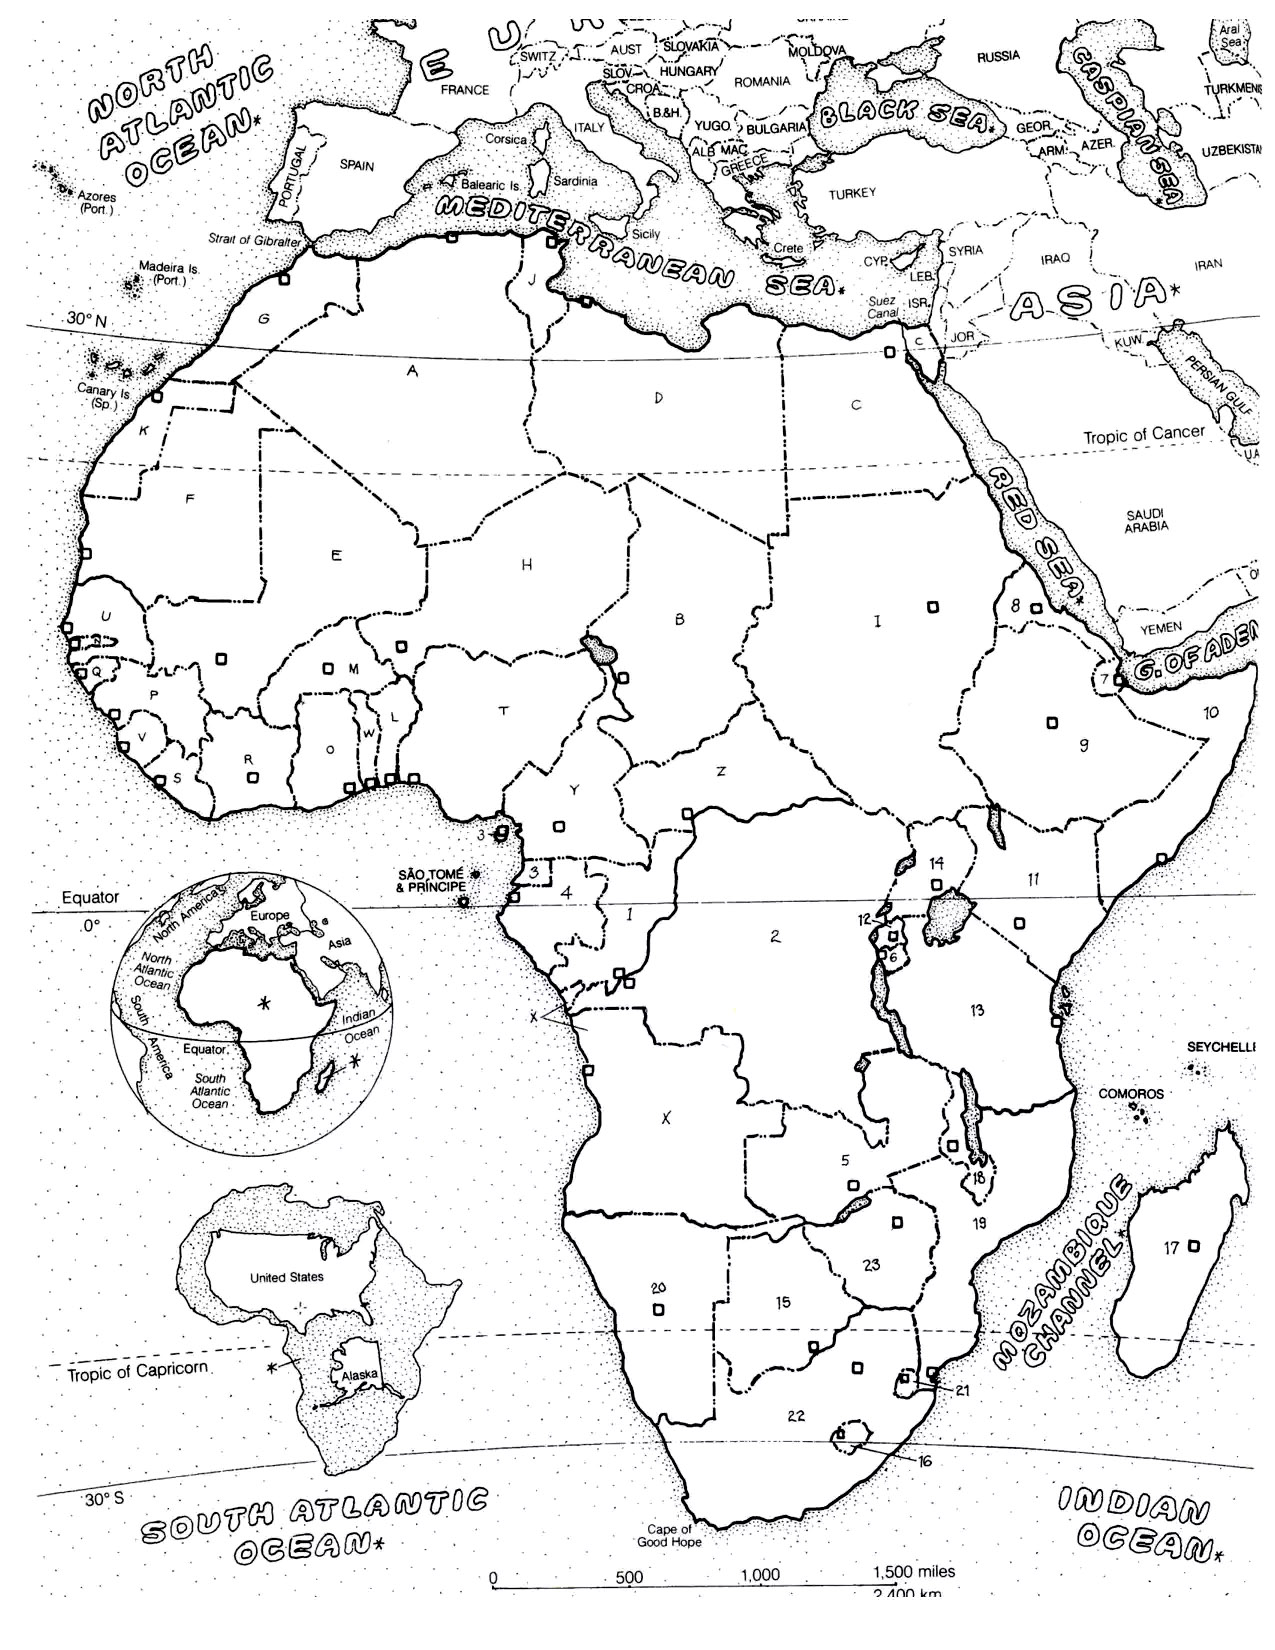 africa map coloring page